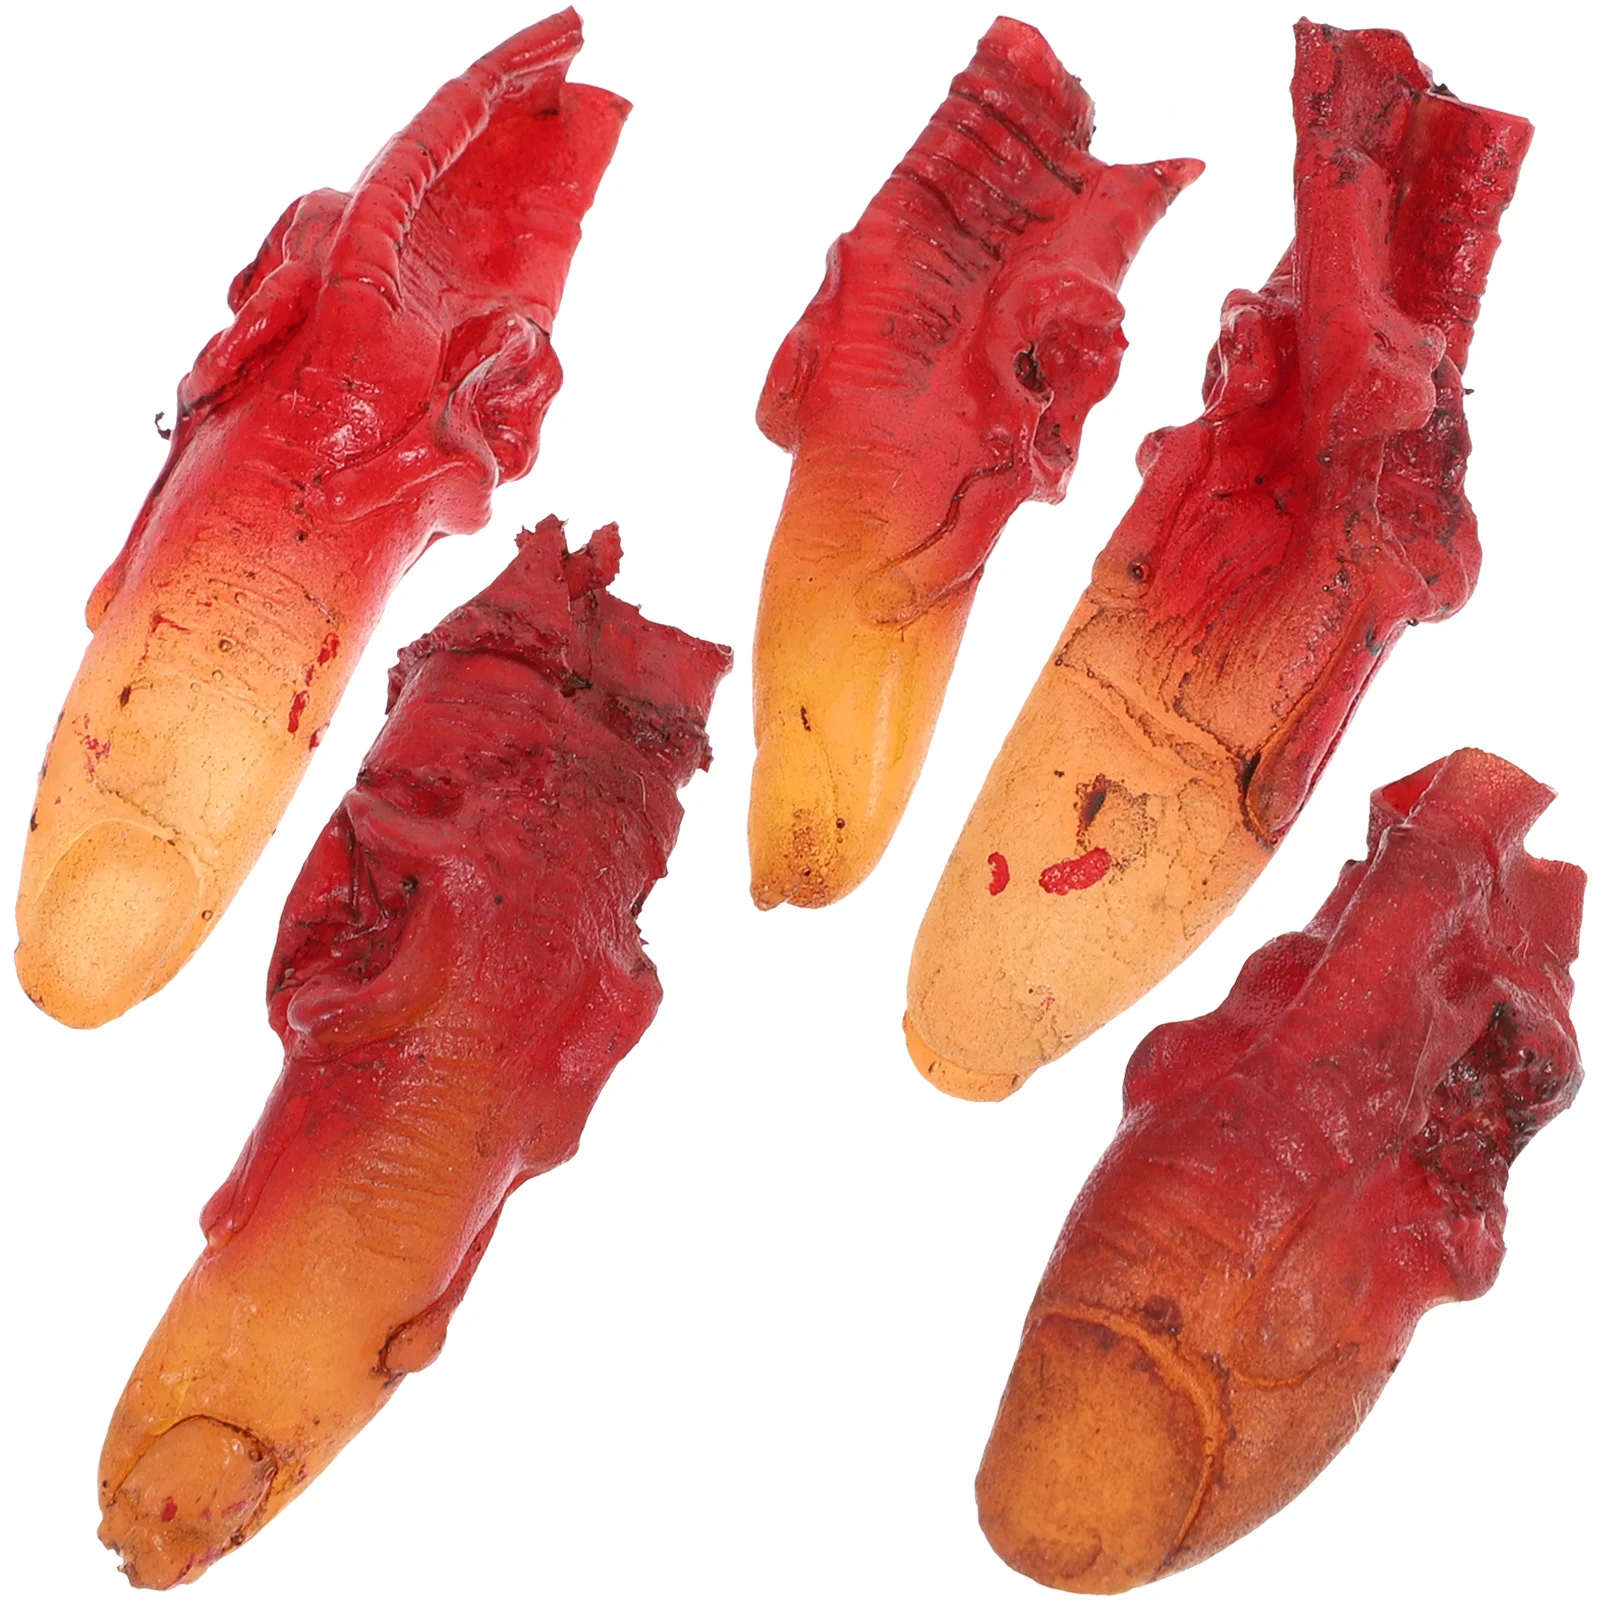 

5pcs Halloween Fake Fingers Realistic Fingers Props Witch Ghost Fingers Horror Scary Toys for Halloween Party Red